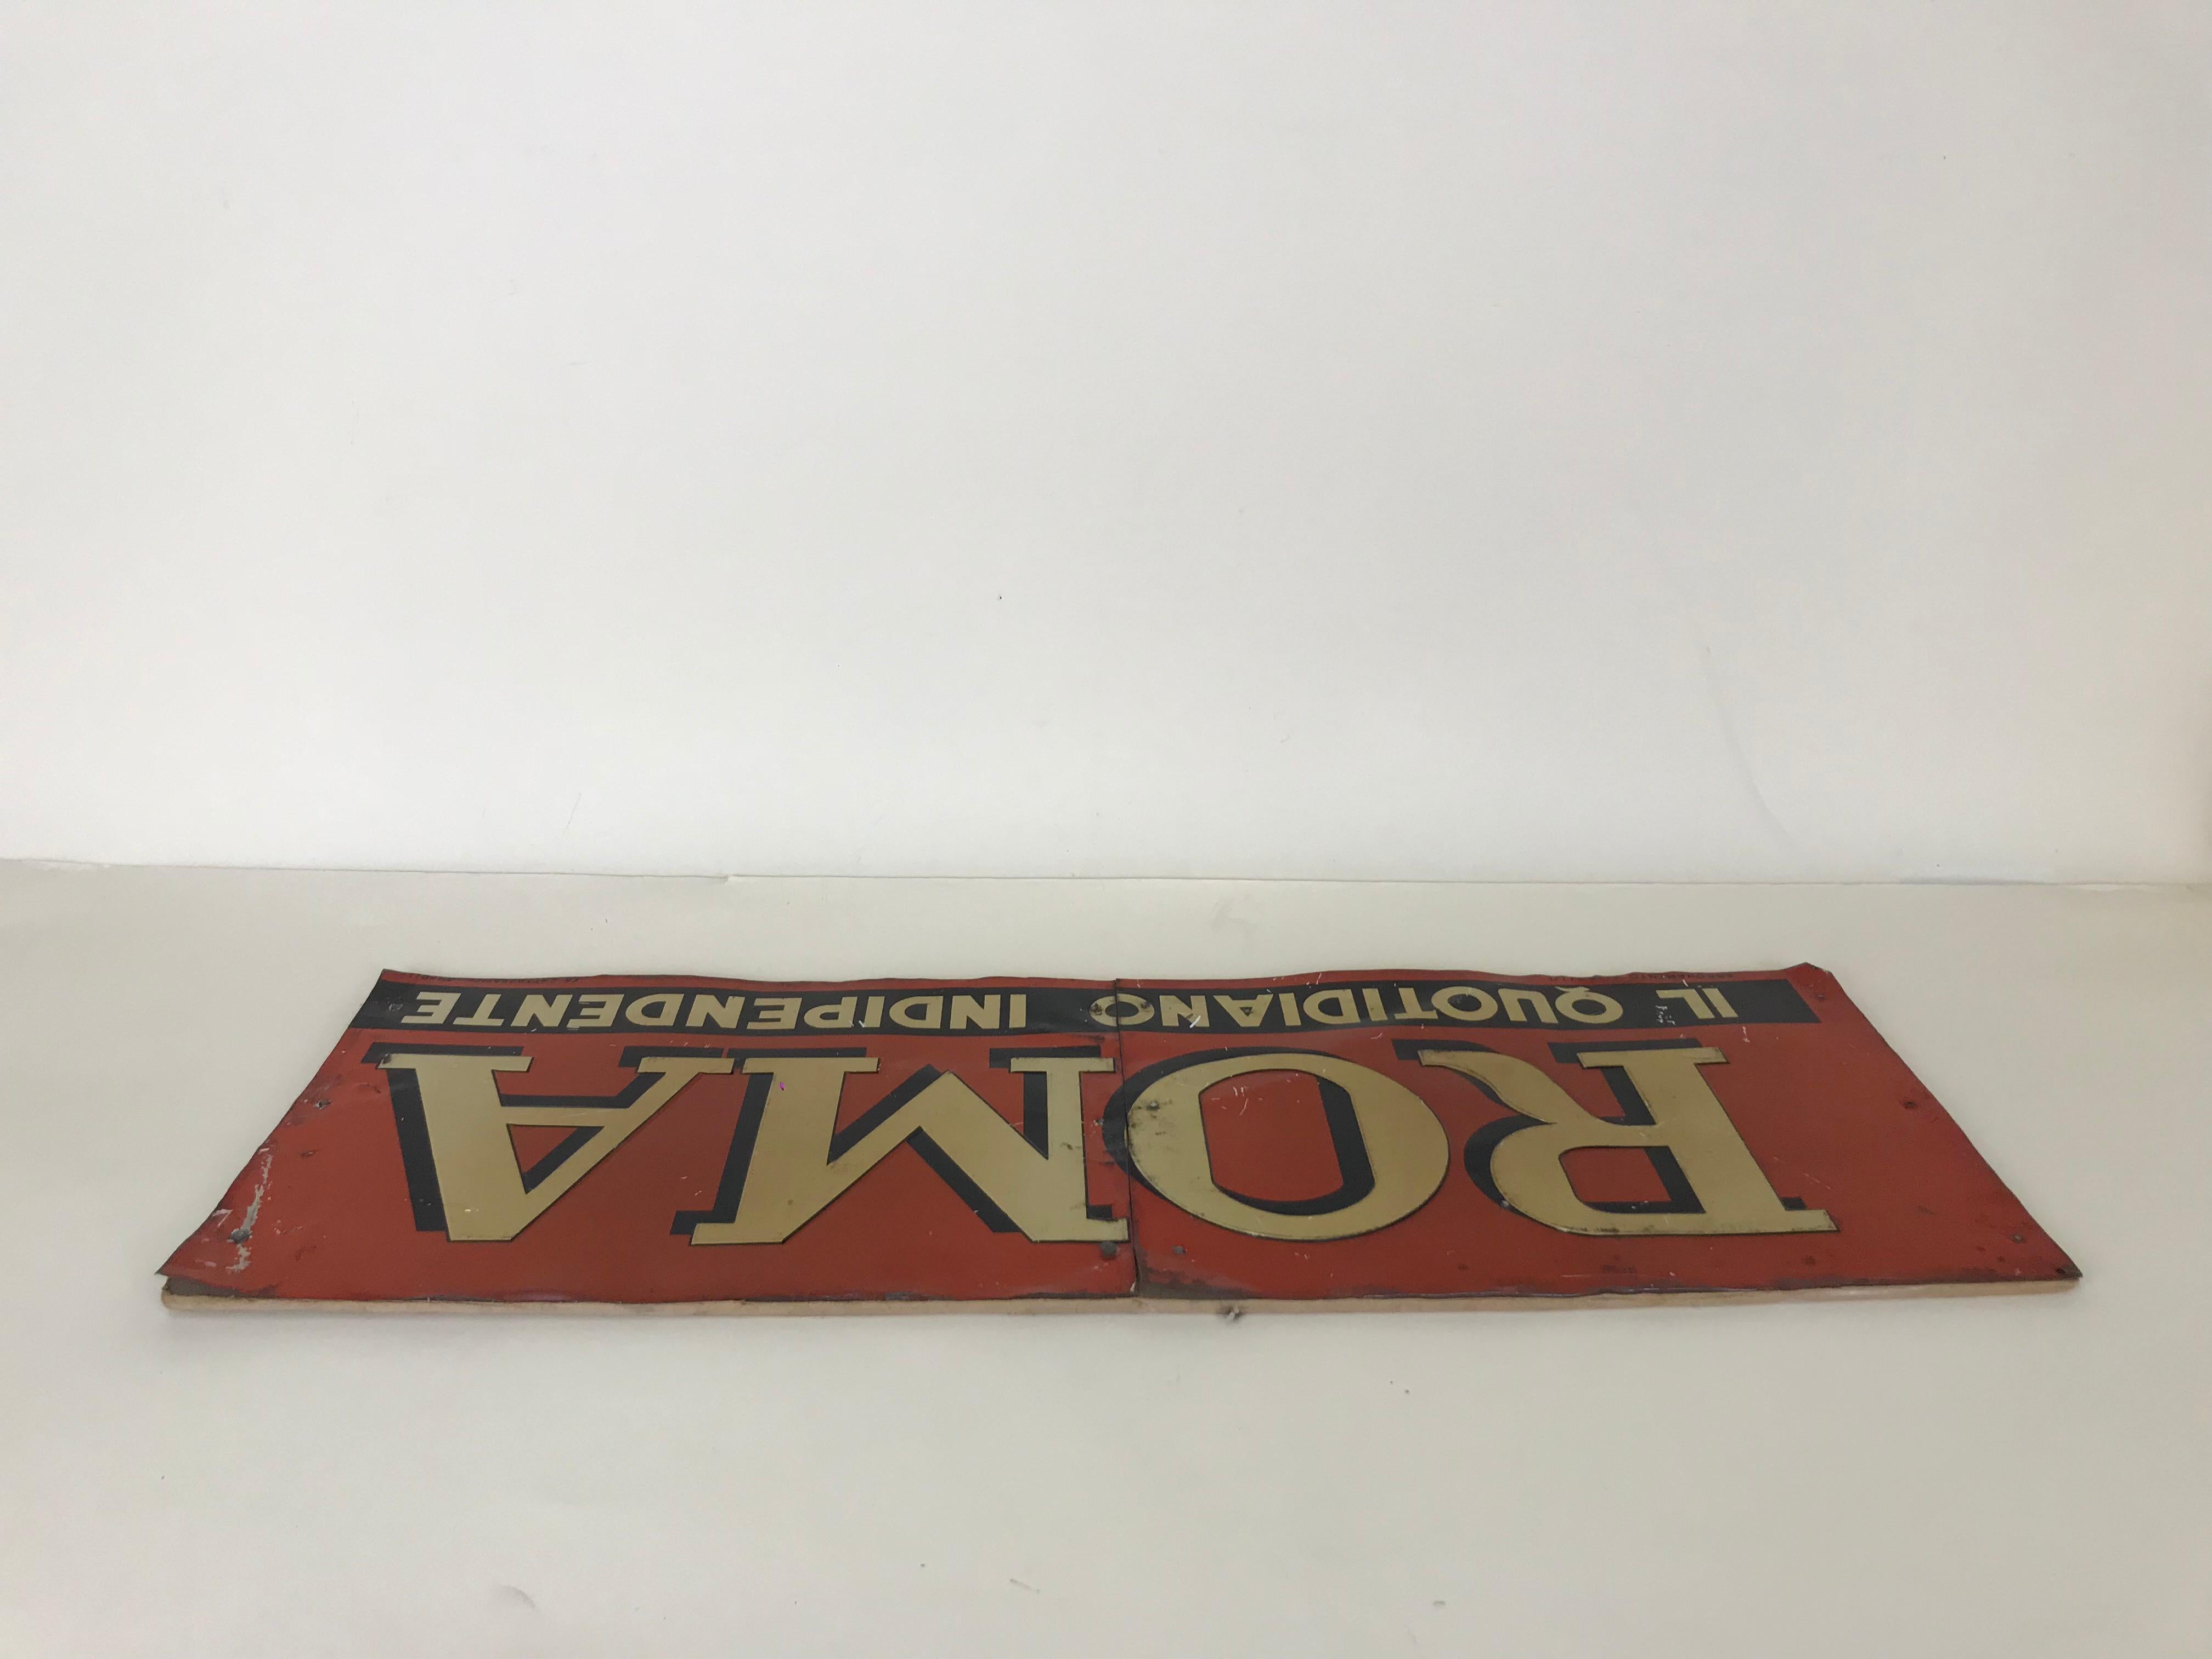 1950s Italian Vintage Transferpinted Red and Cream Roma Newspaper Sign (Italienisch)